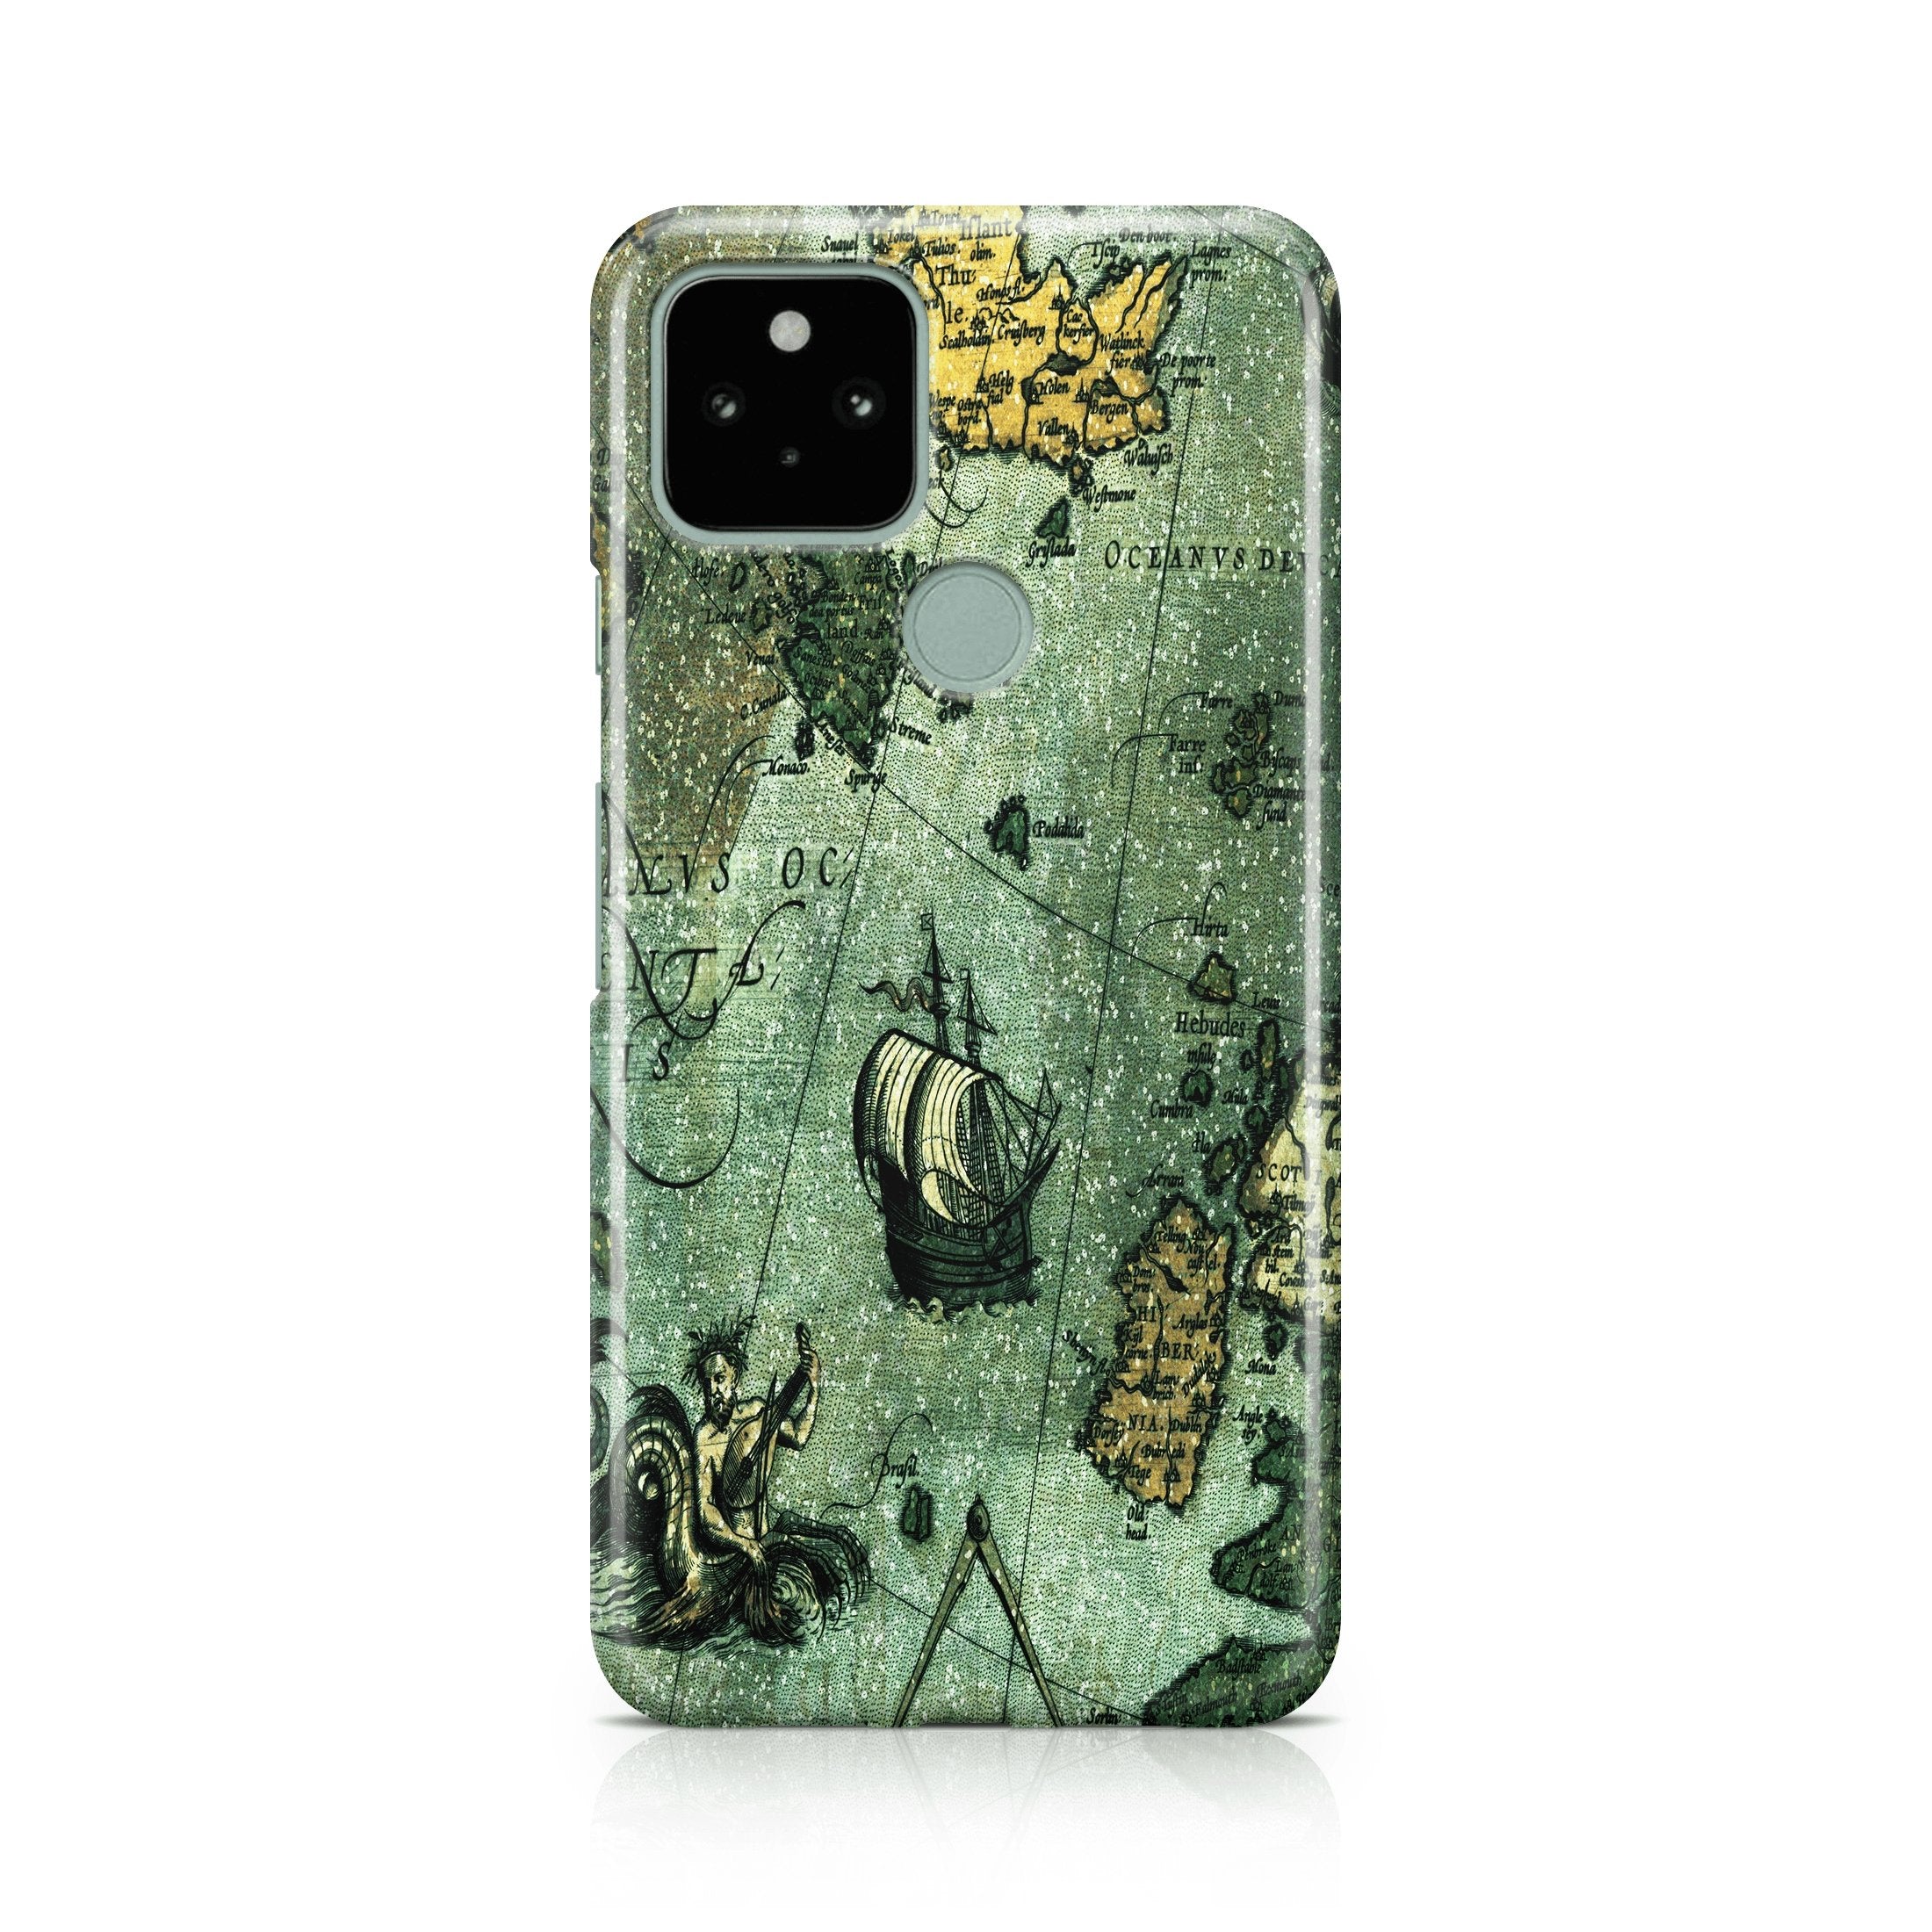 Ancient Water - Google phone case designs by CaseSwagger